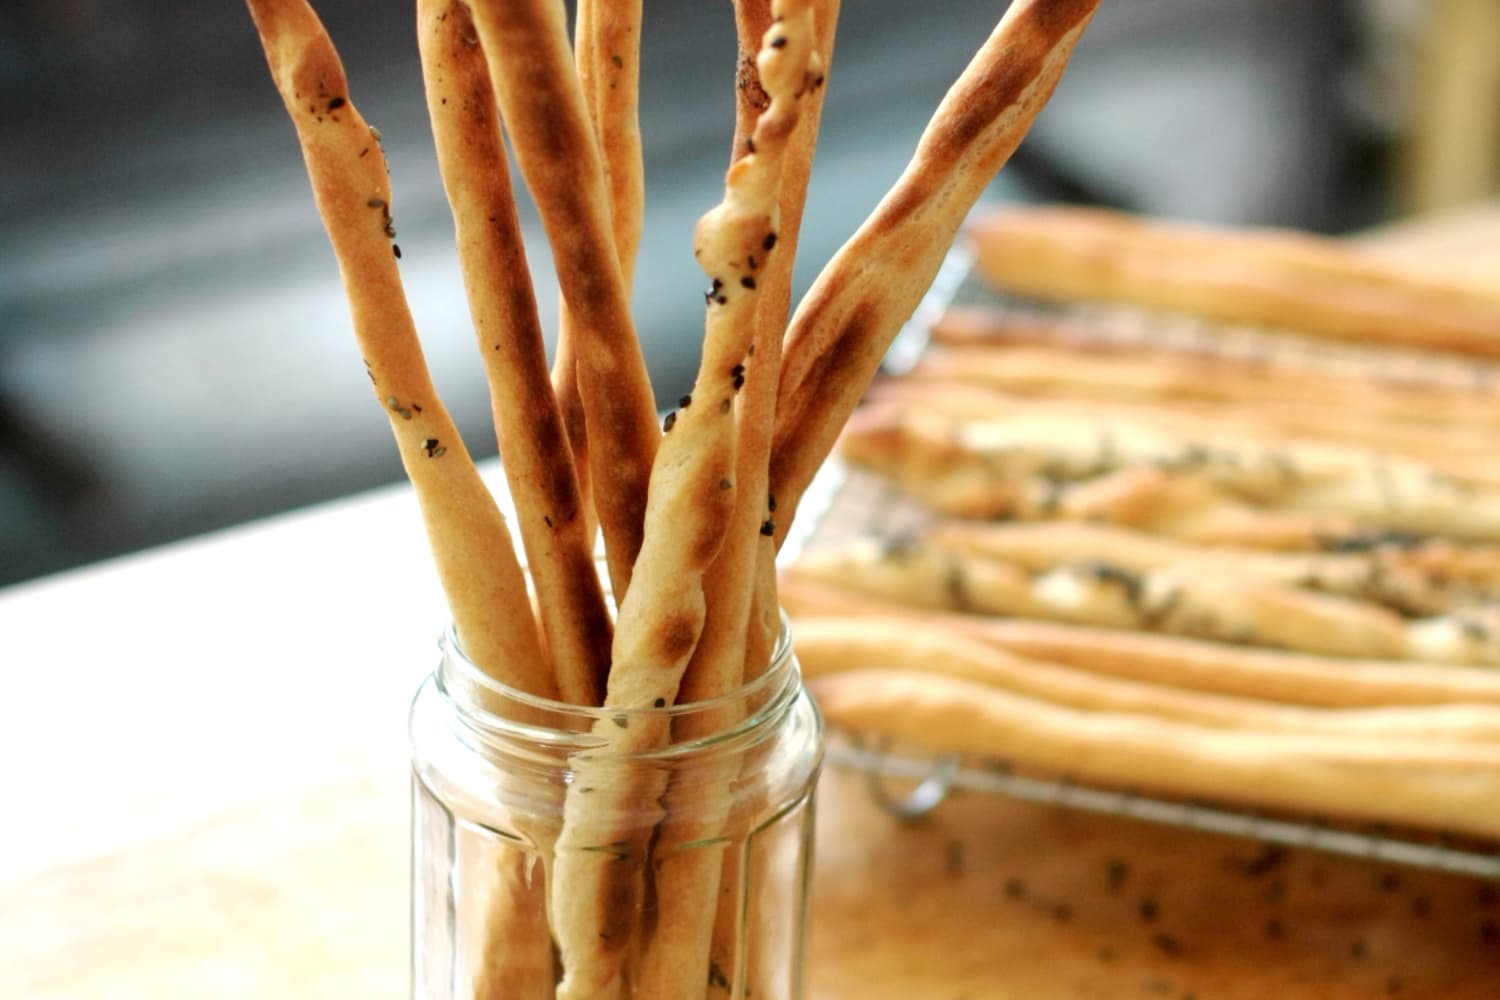 The Recipe Fresh (With Herbs) Kitchn Breadsticks Grissini |